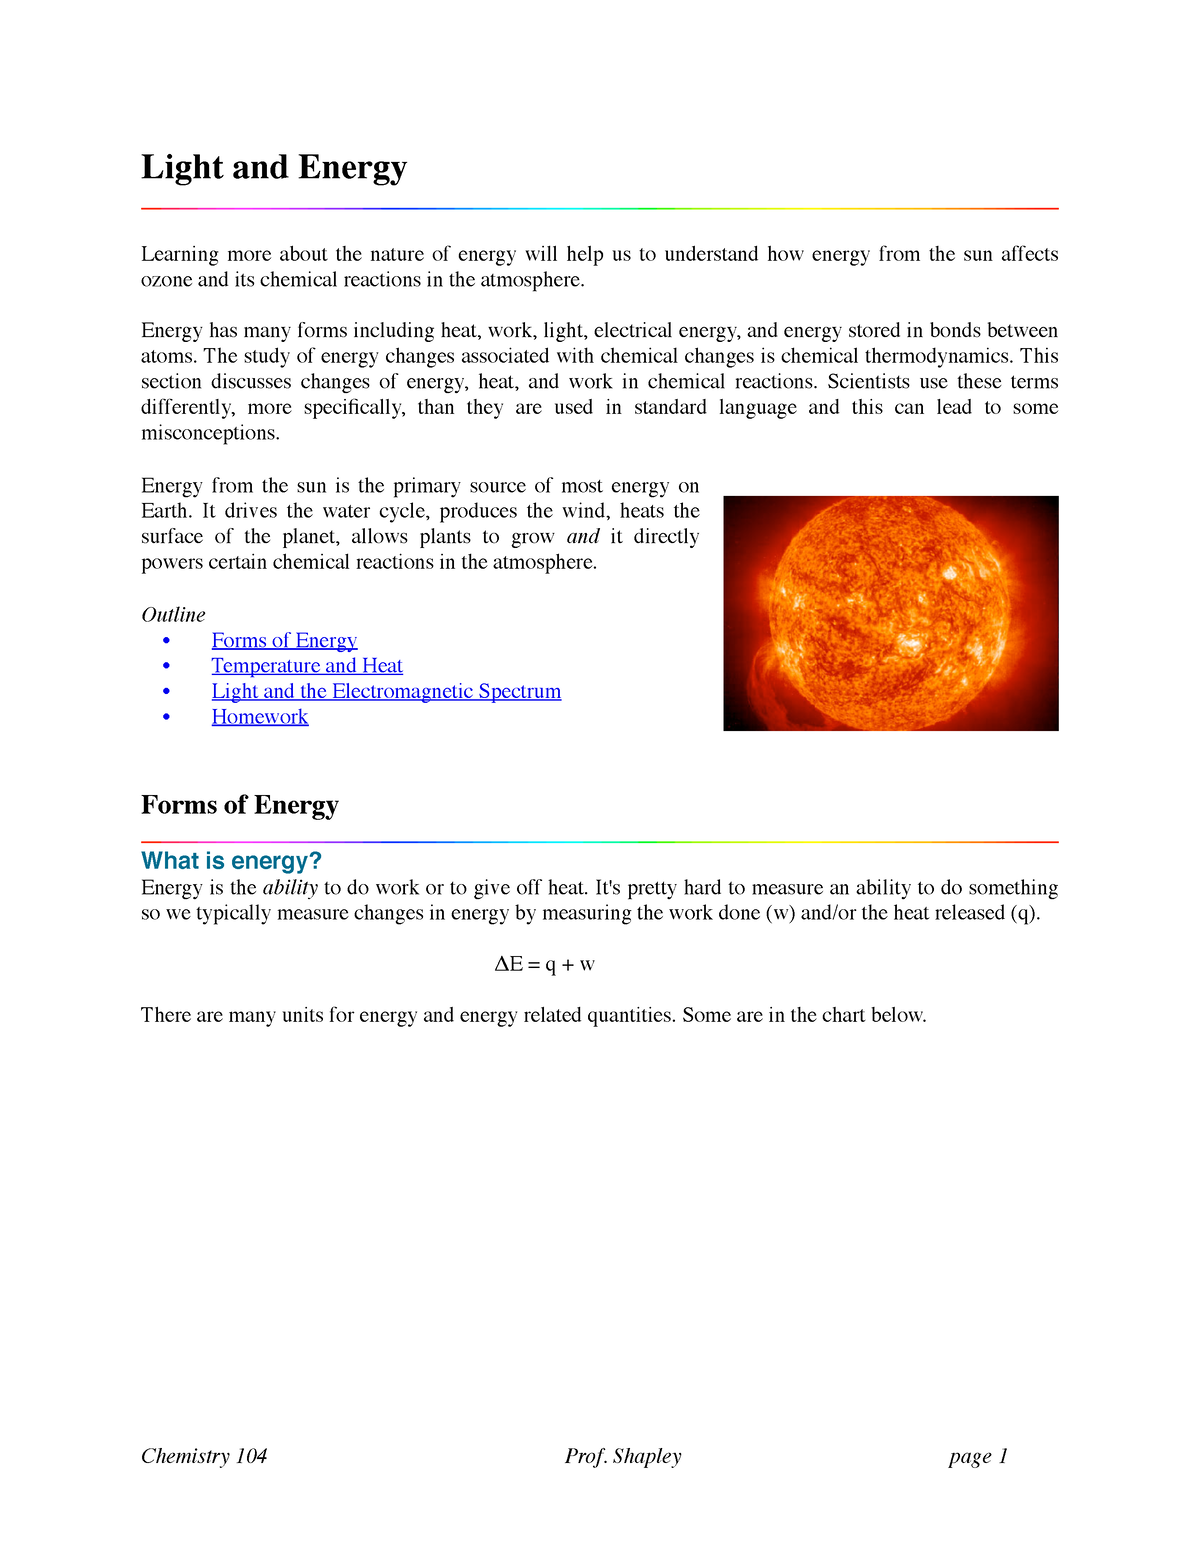 Light and Energy, energy from the sun affects ozone and its chemical ...